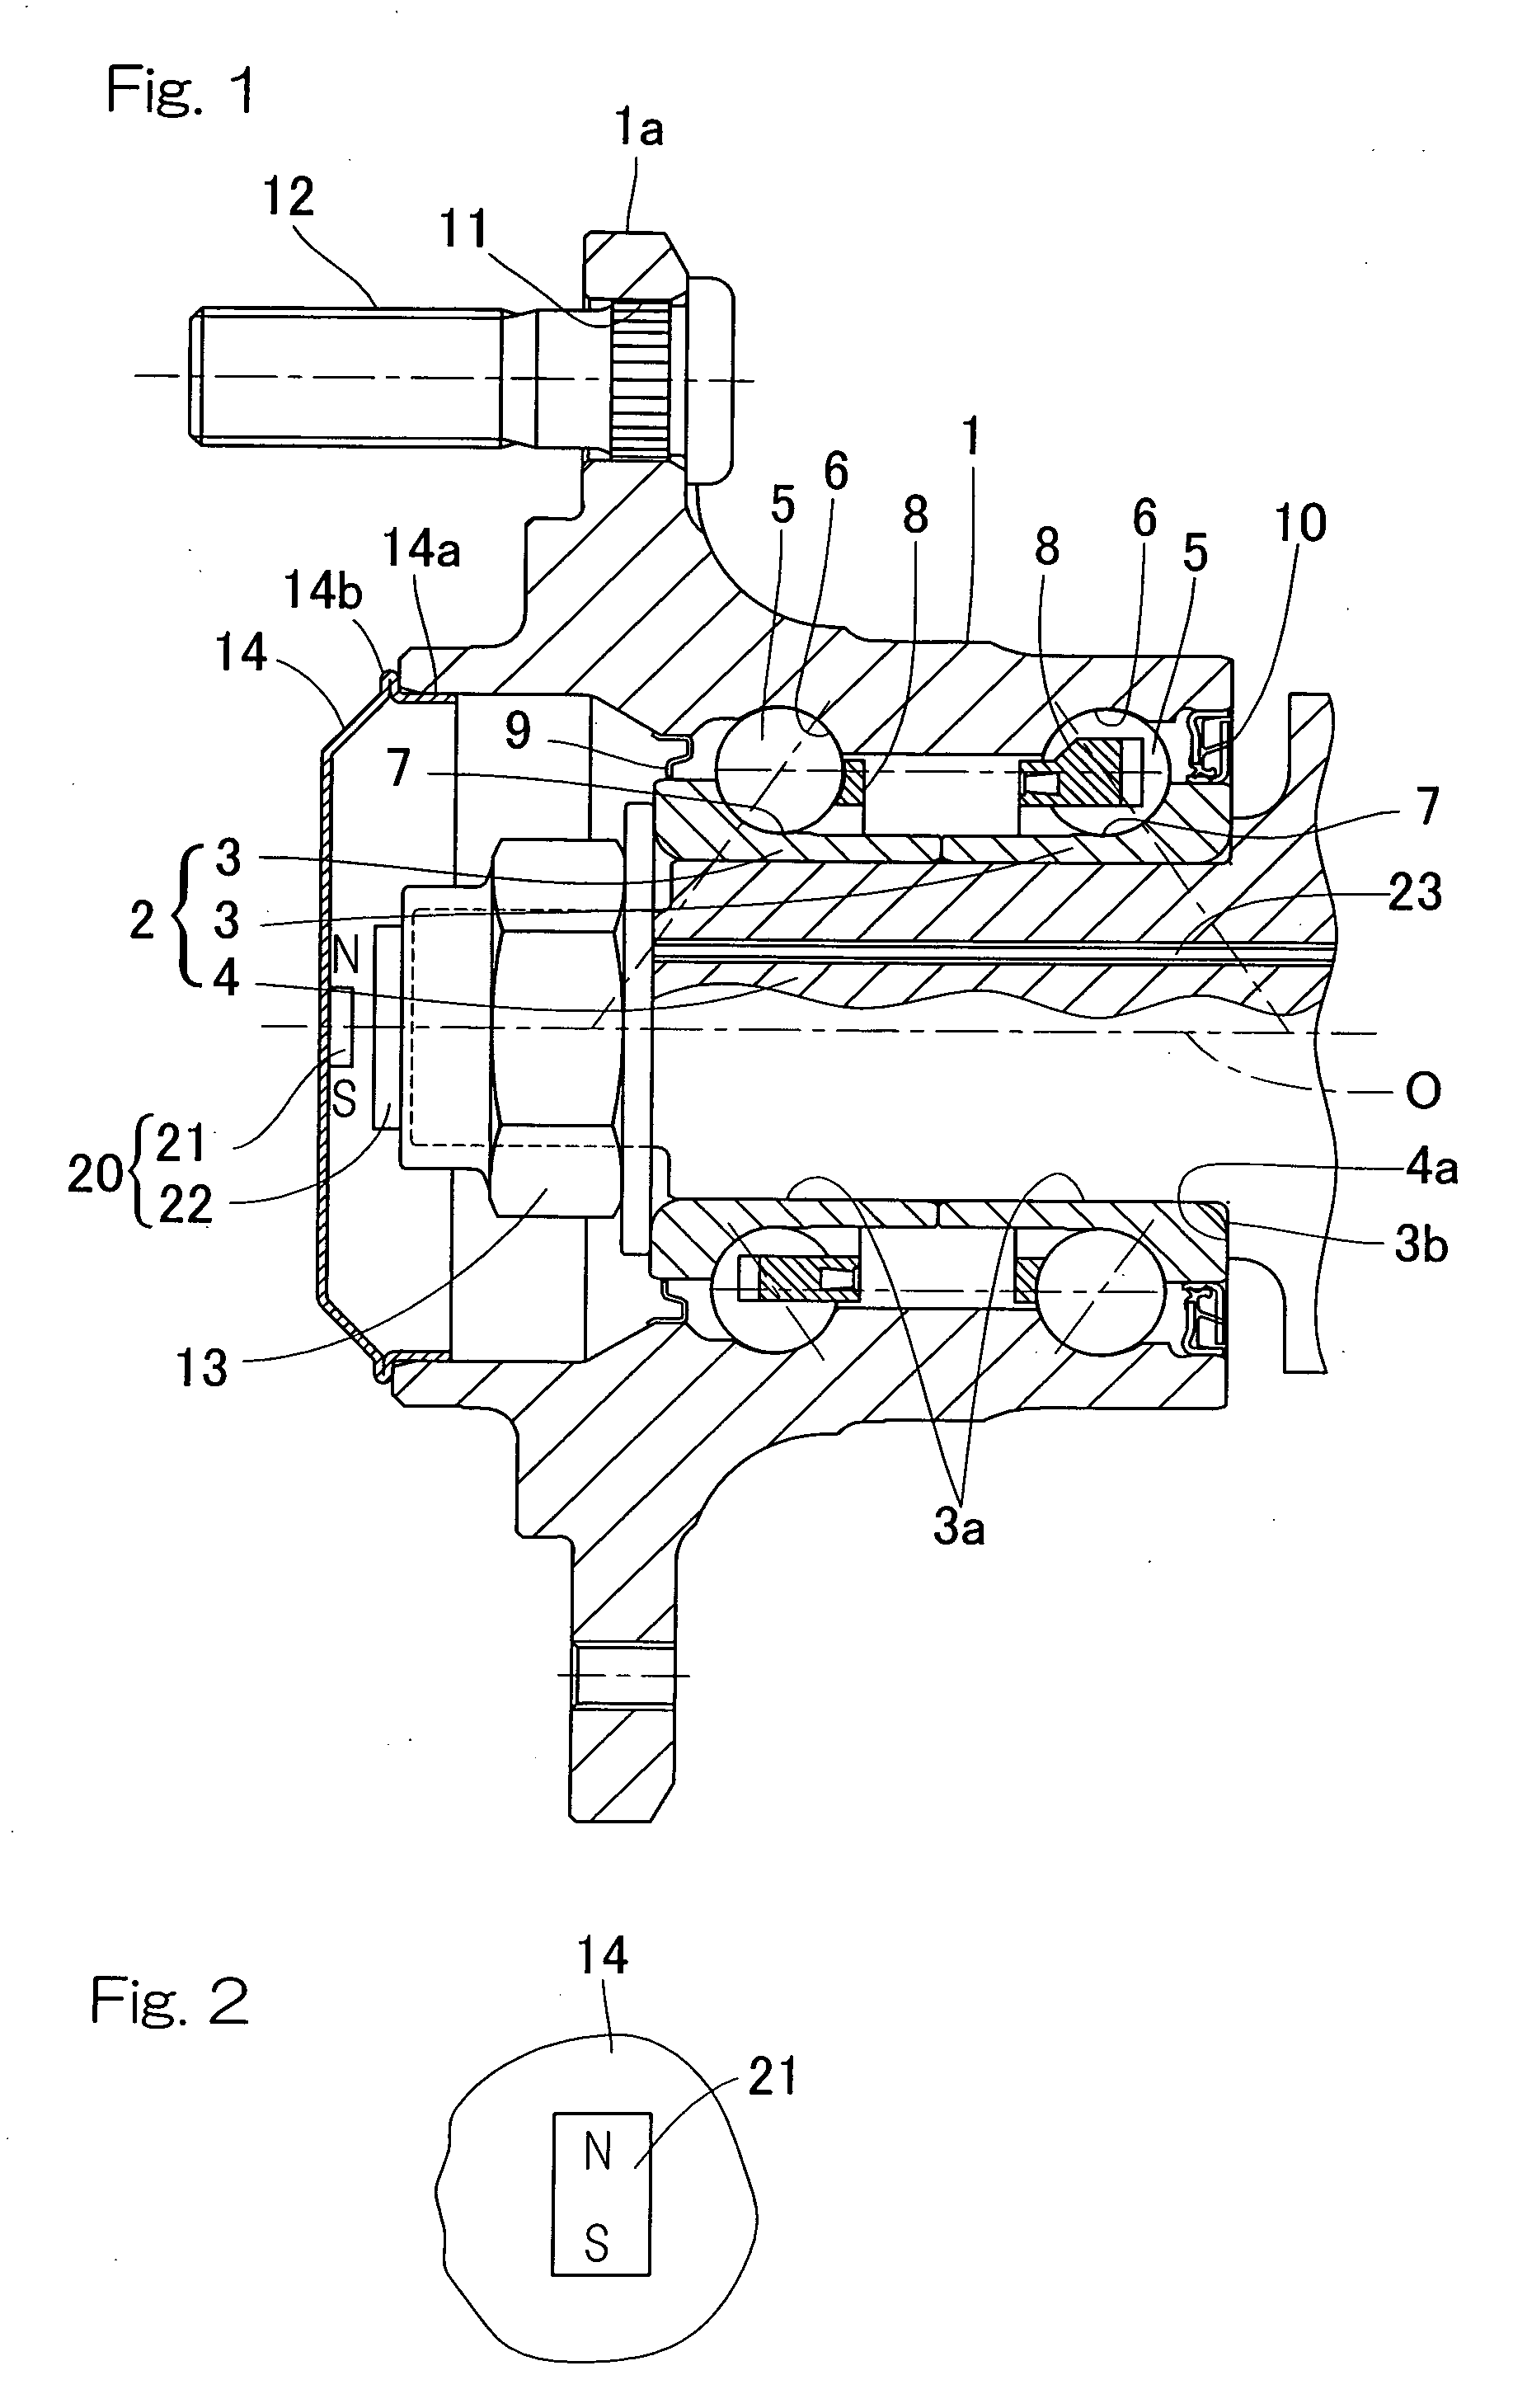 Rotation sensor-equipped bearing device for wheel